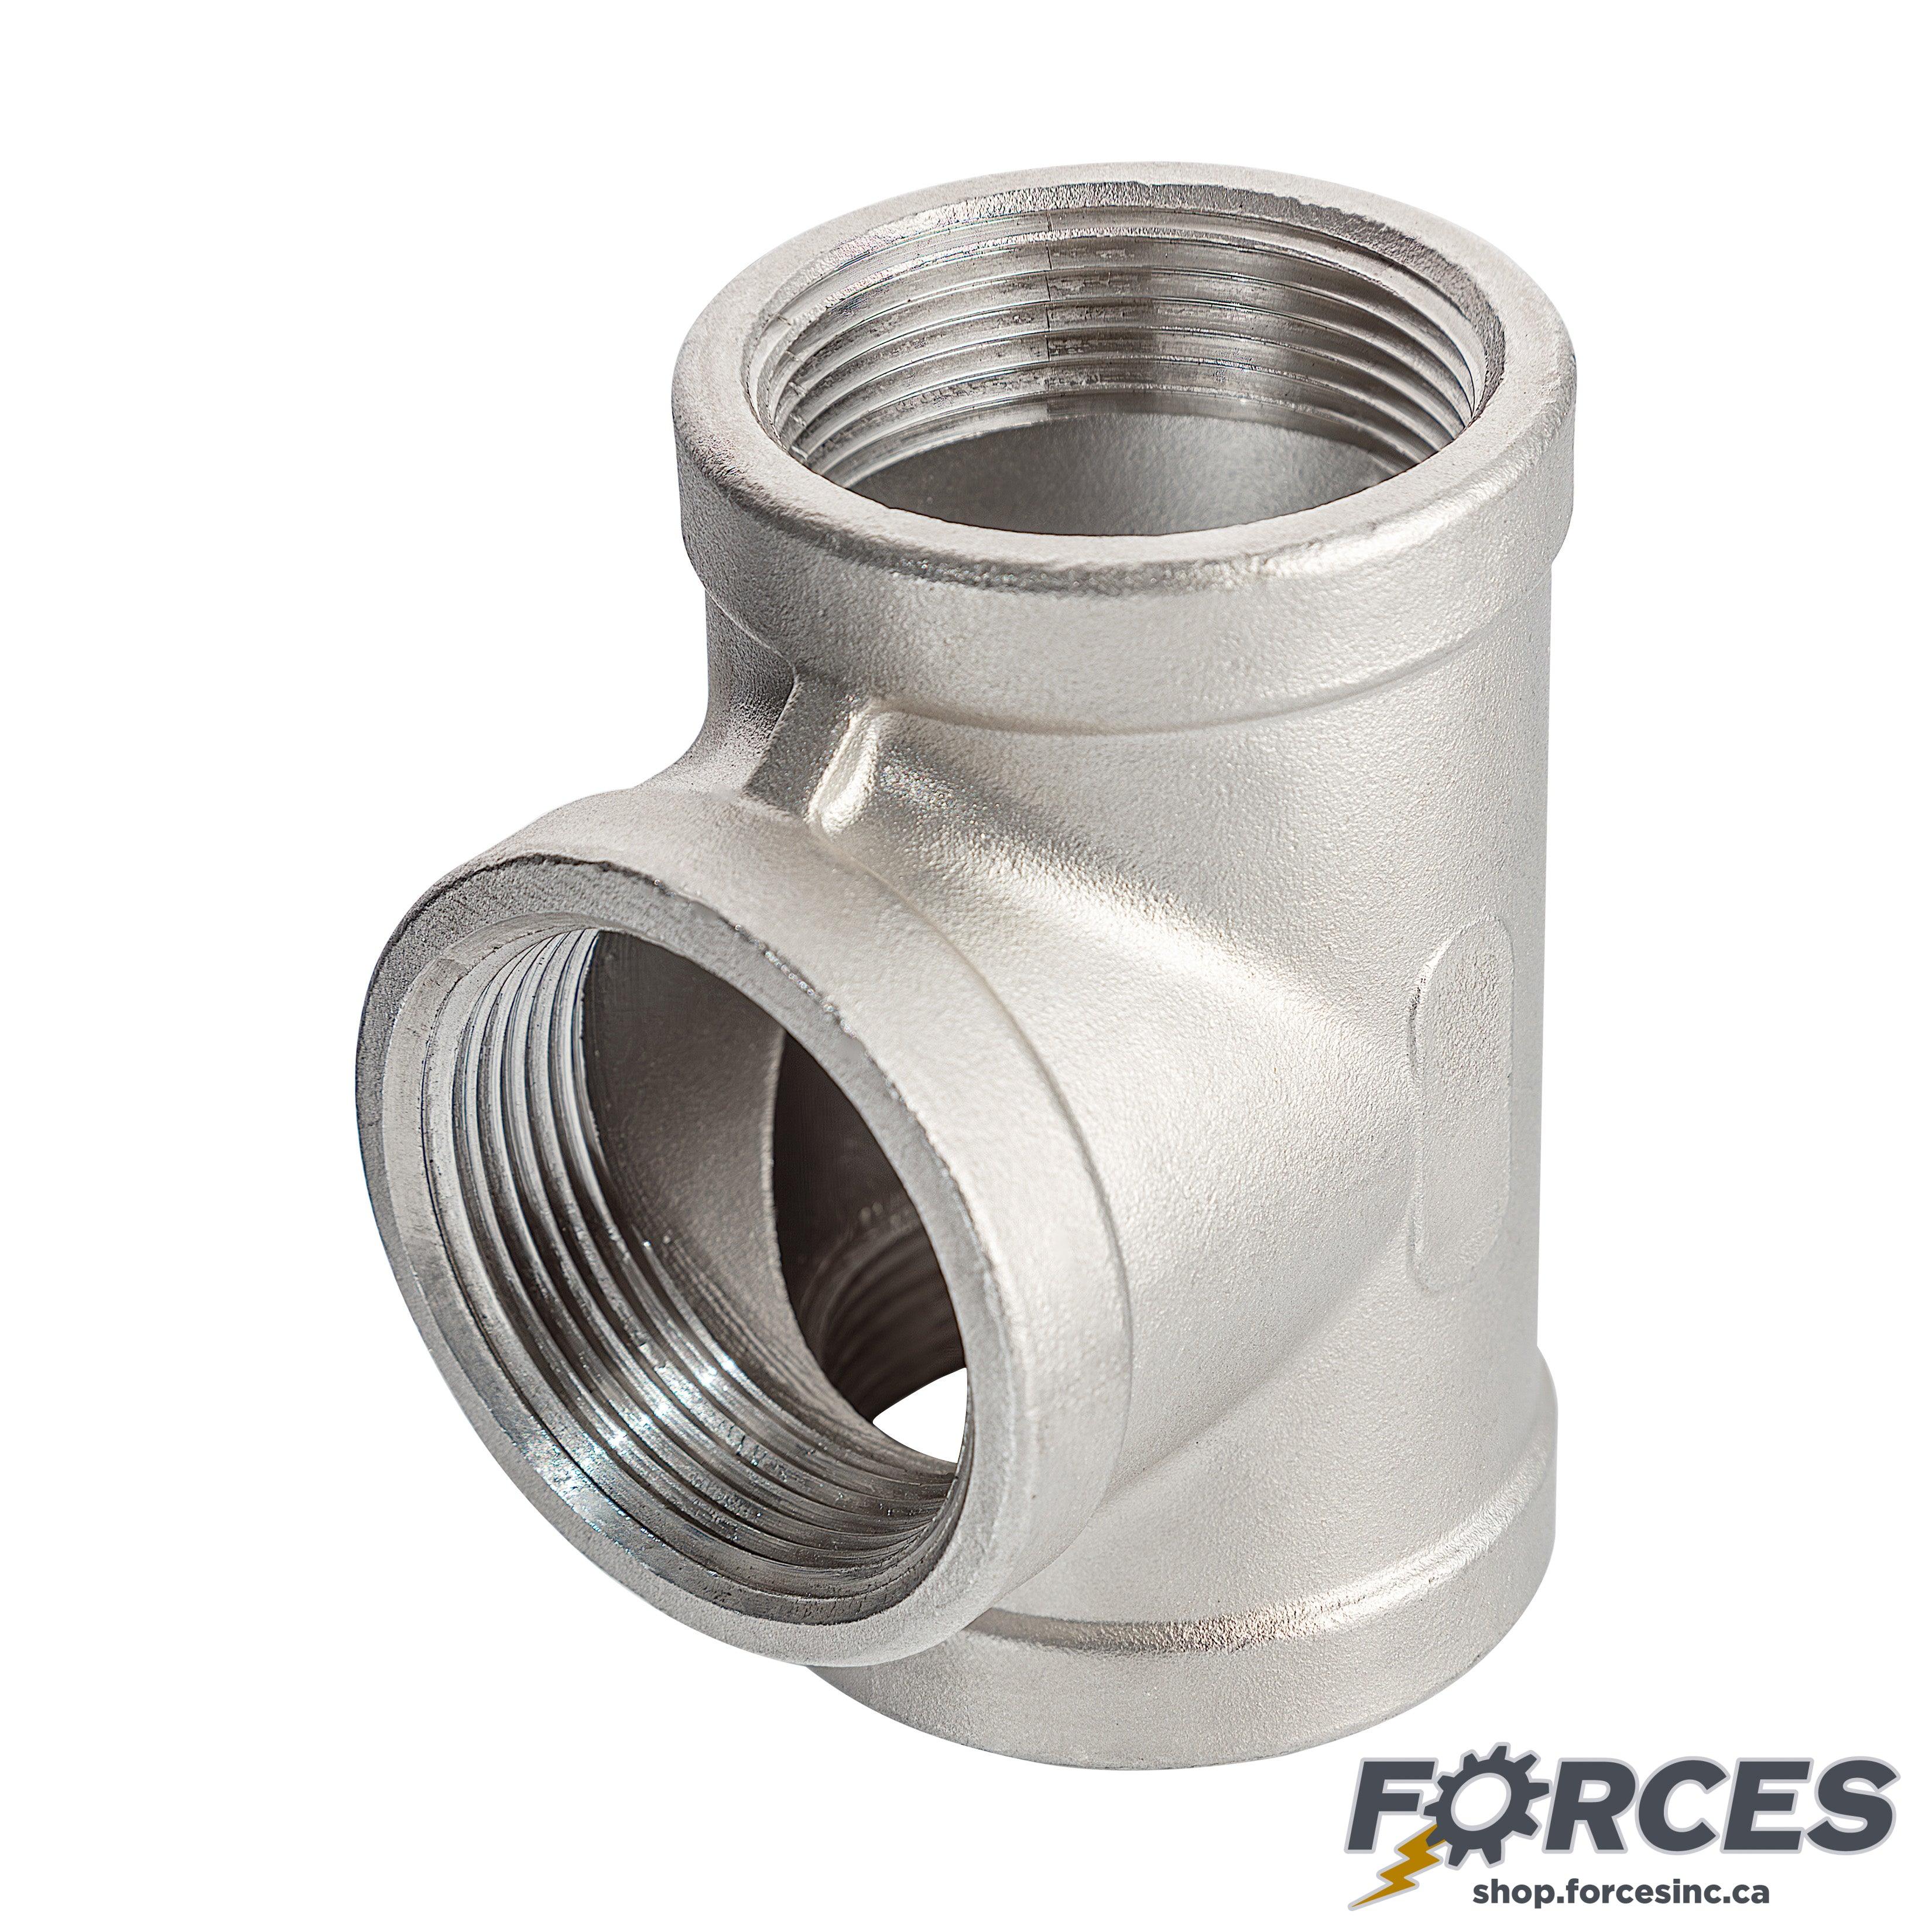 3/4" Tee NPT #150 - Stainless Steel 304 - Forces Inc